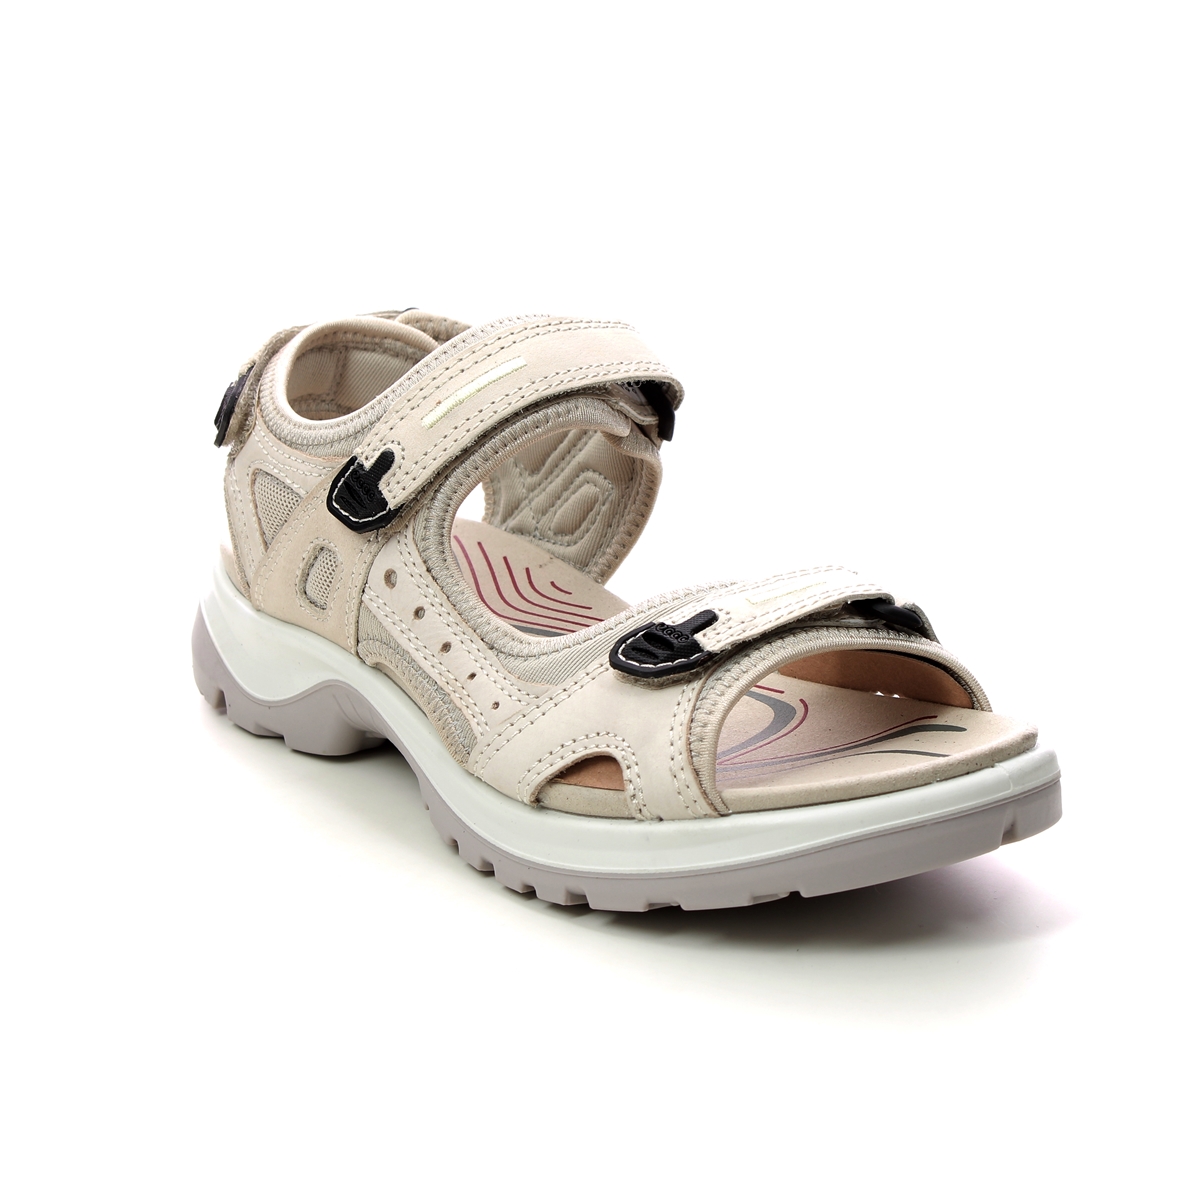 Ecco Offroad Lady Light Taupe Womens Walking Sandals 069563-01378 In Size 41 In Plain Light Taupe